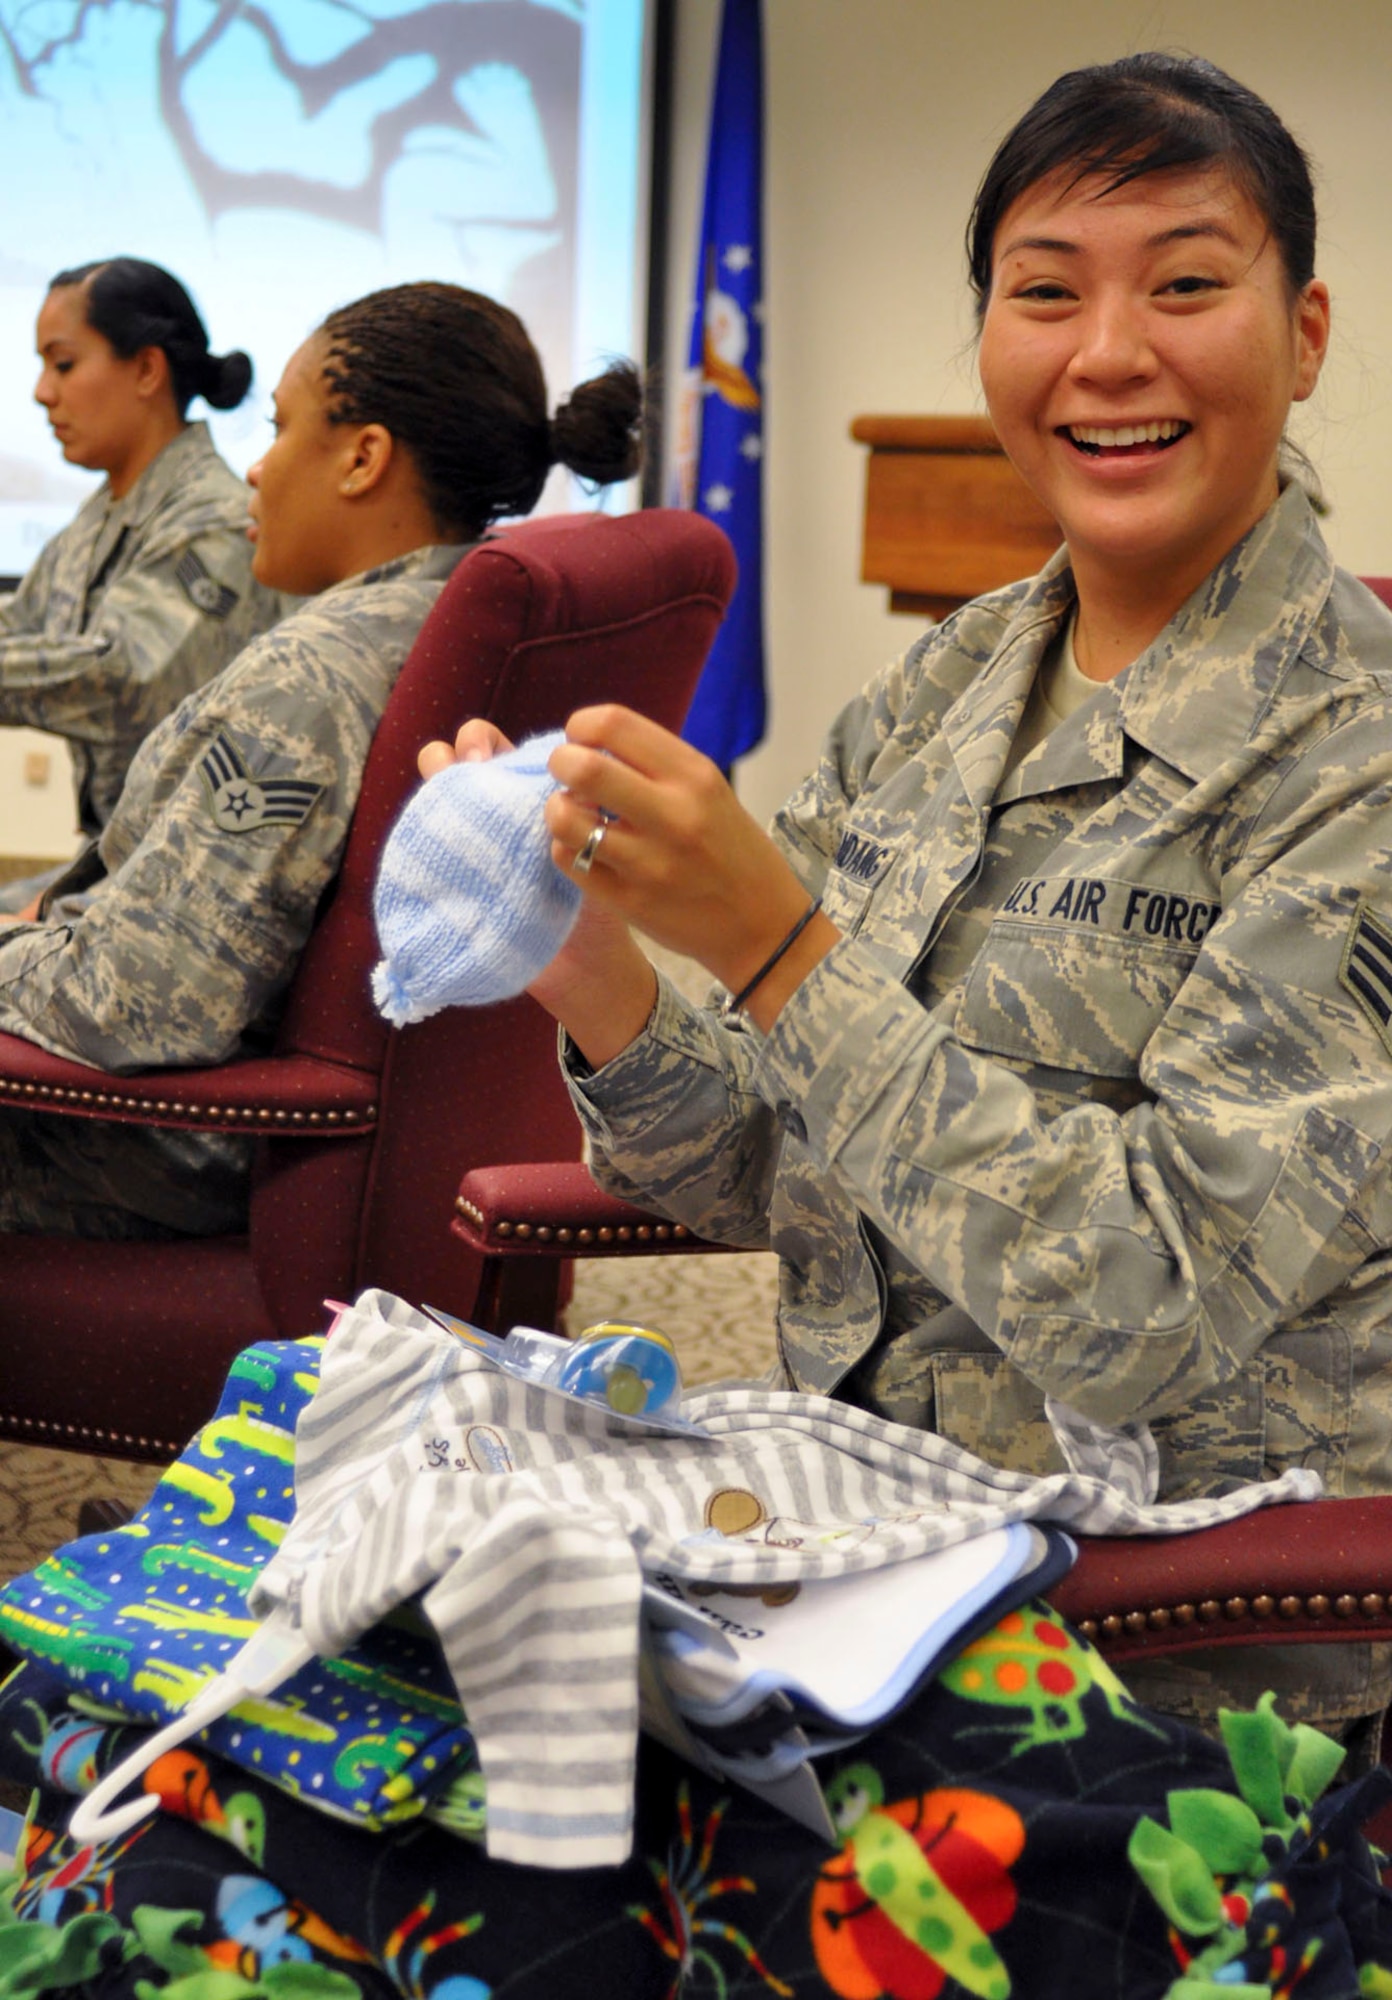 Senior Airman Ashley Carandang, 4th Combat Camera Squadron, is excited to find a tiny, hand crocheted infant hat in her gift bag at the Bundles for Babies course at March Air Reserve Base, Calif., June 7, 2011. Airman Carandang is expecting her first child in November and found out a week before the class that it is going to be a boy. (U.S. Air Force photo/Megan Just)